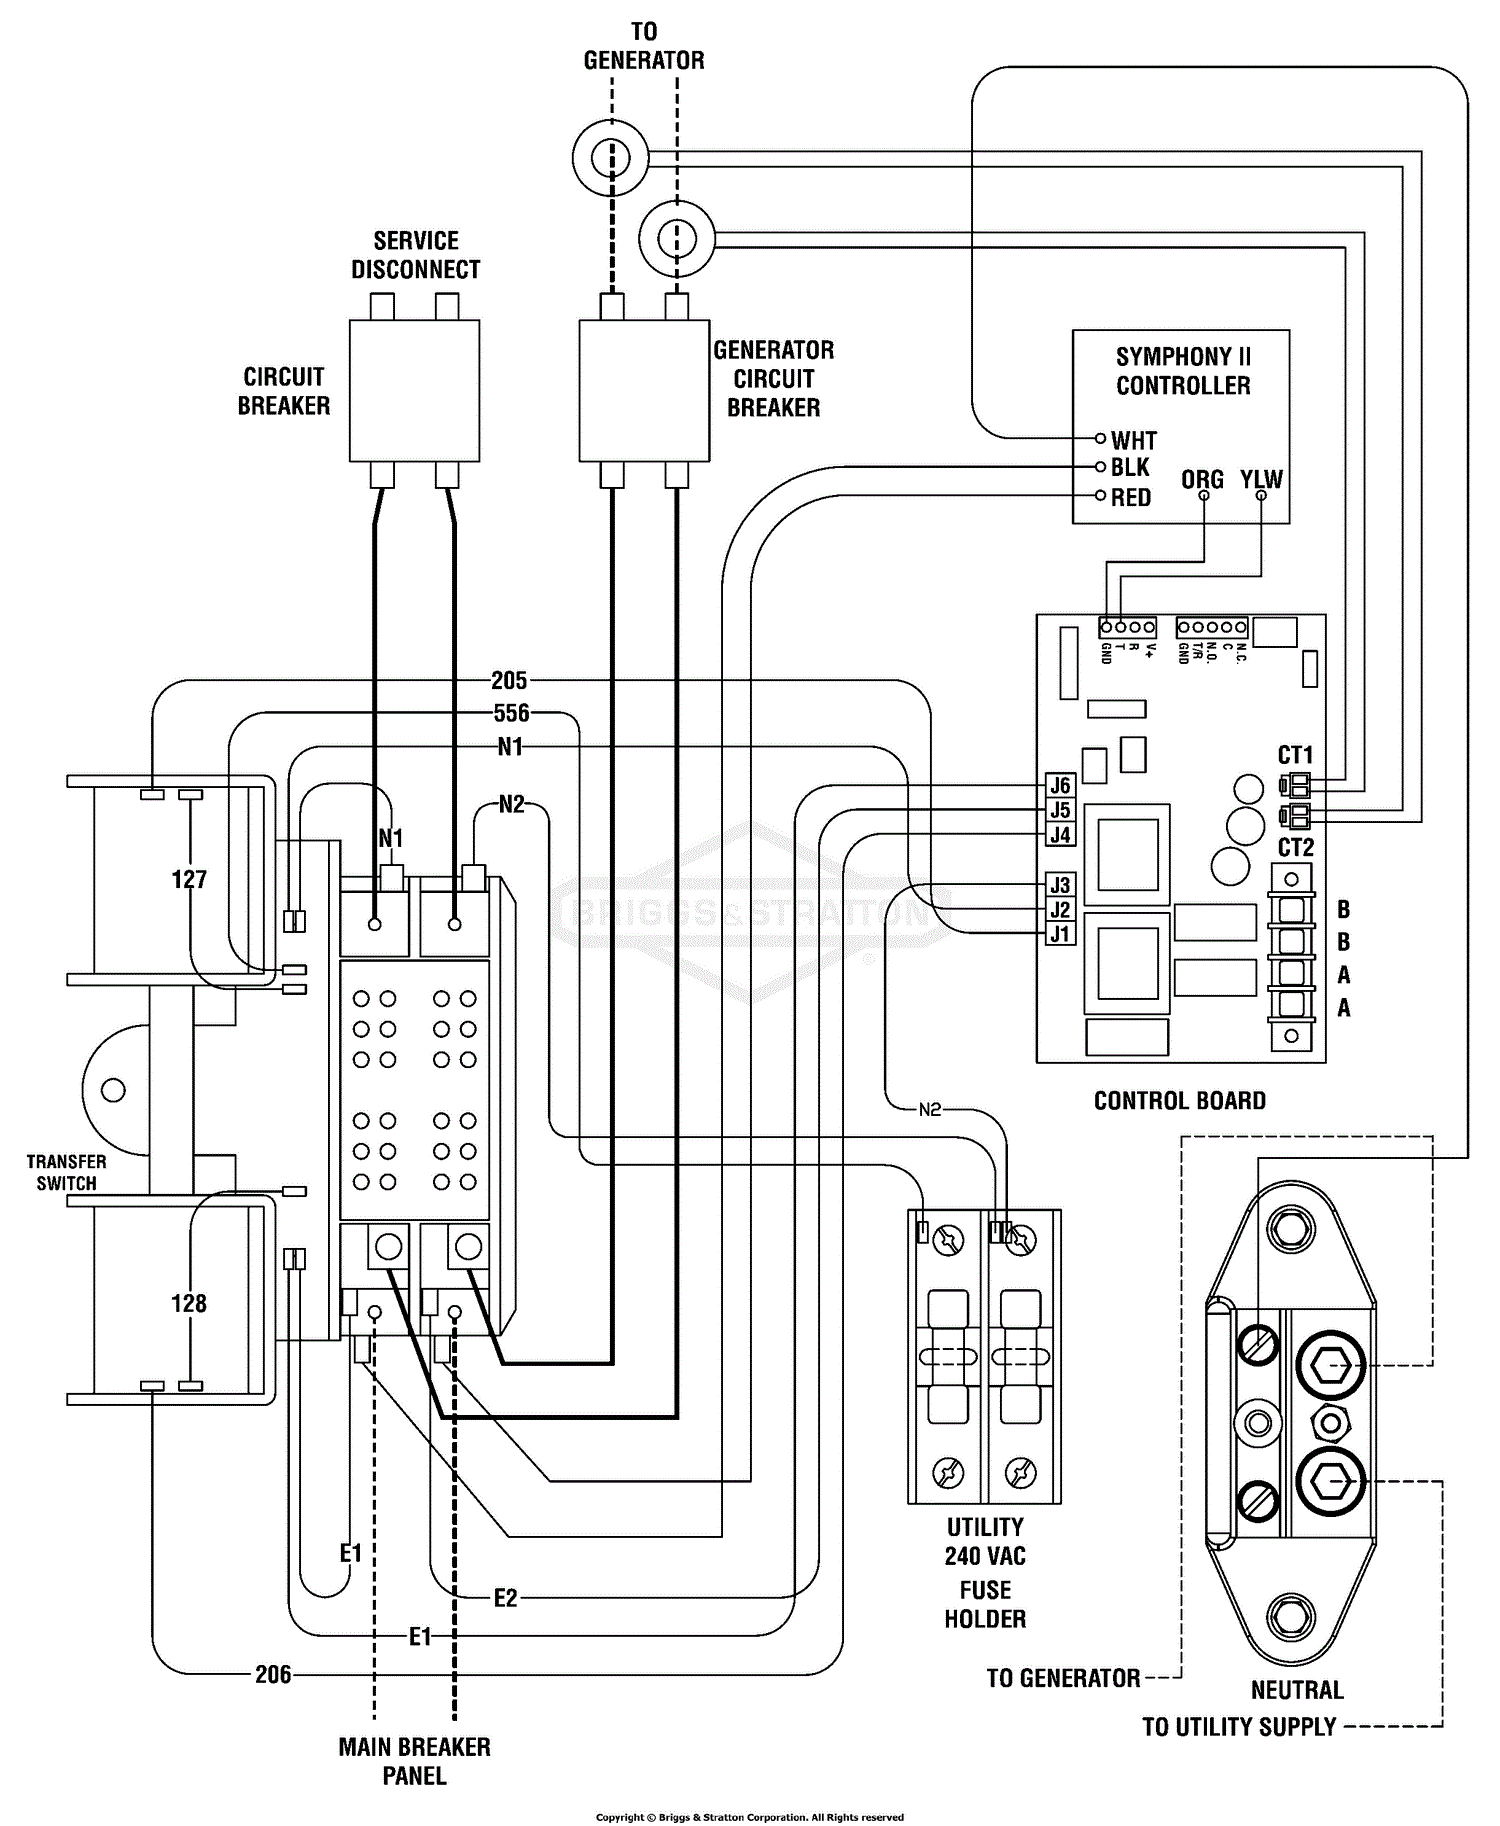 Wiring A Transfer Switch Diagram Database